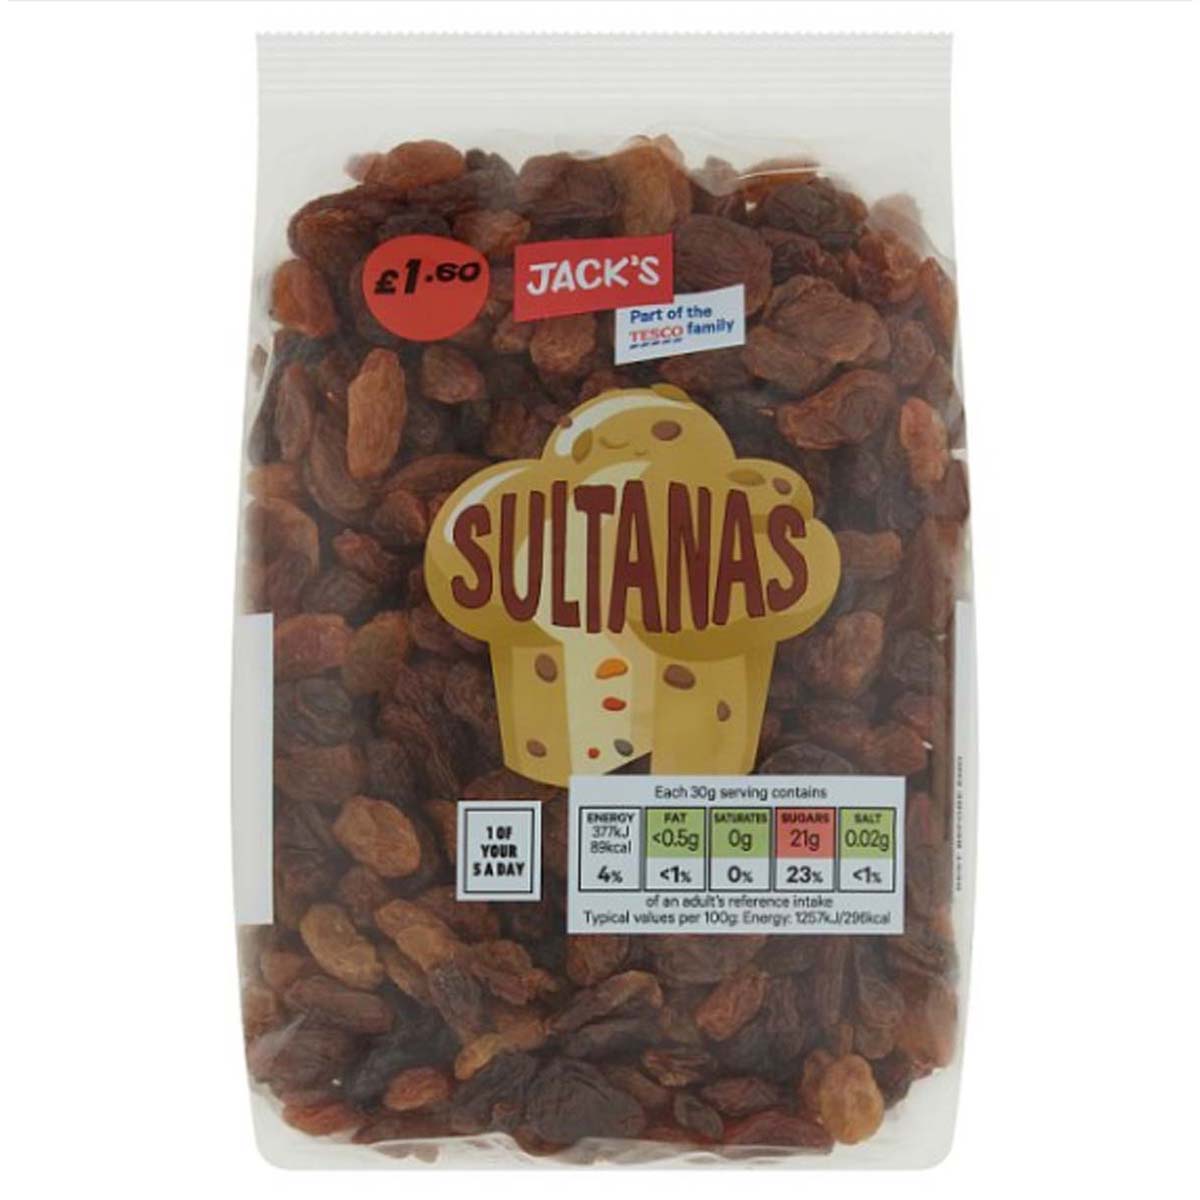 Jack's - Sultanas - 375g - Continental Food Store